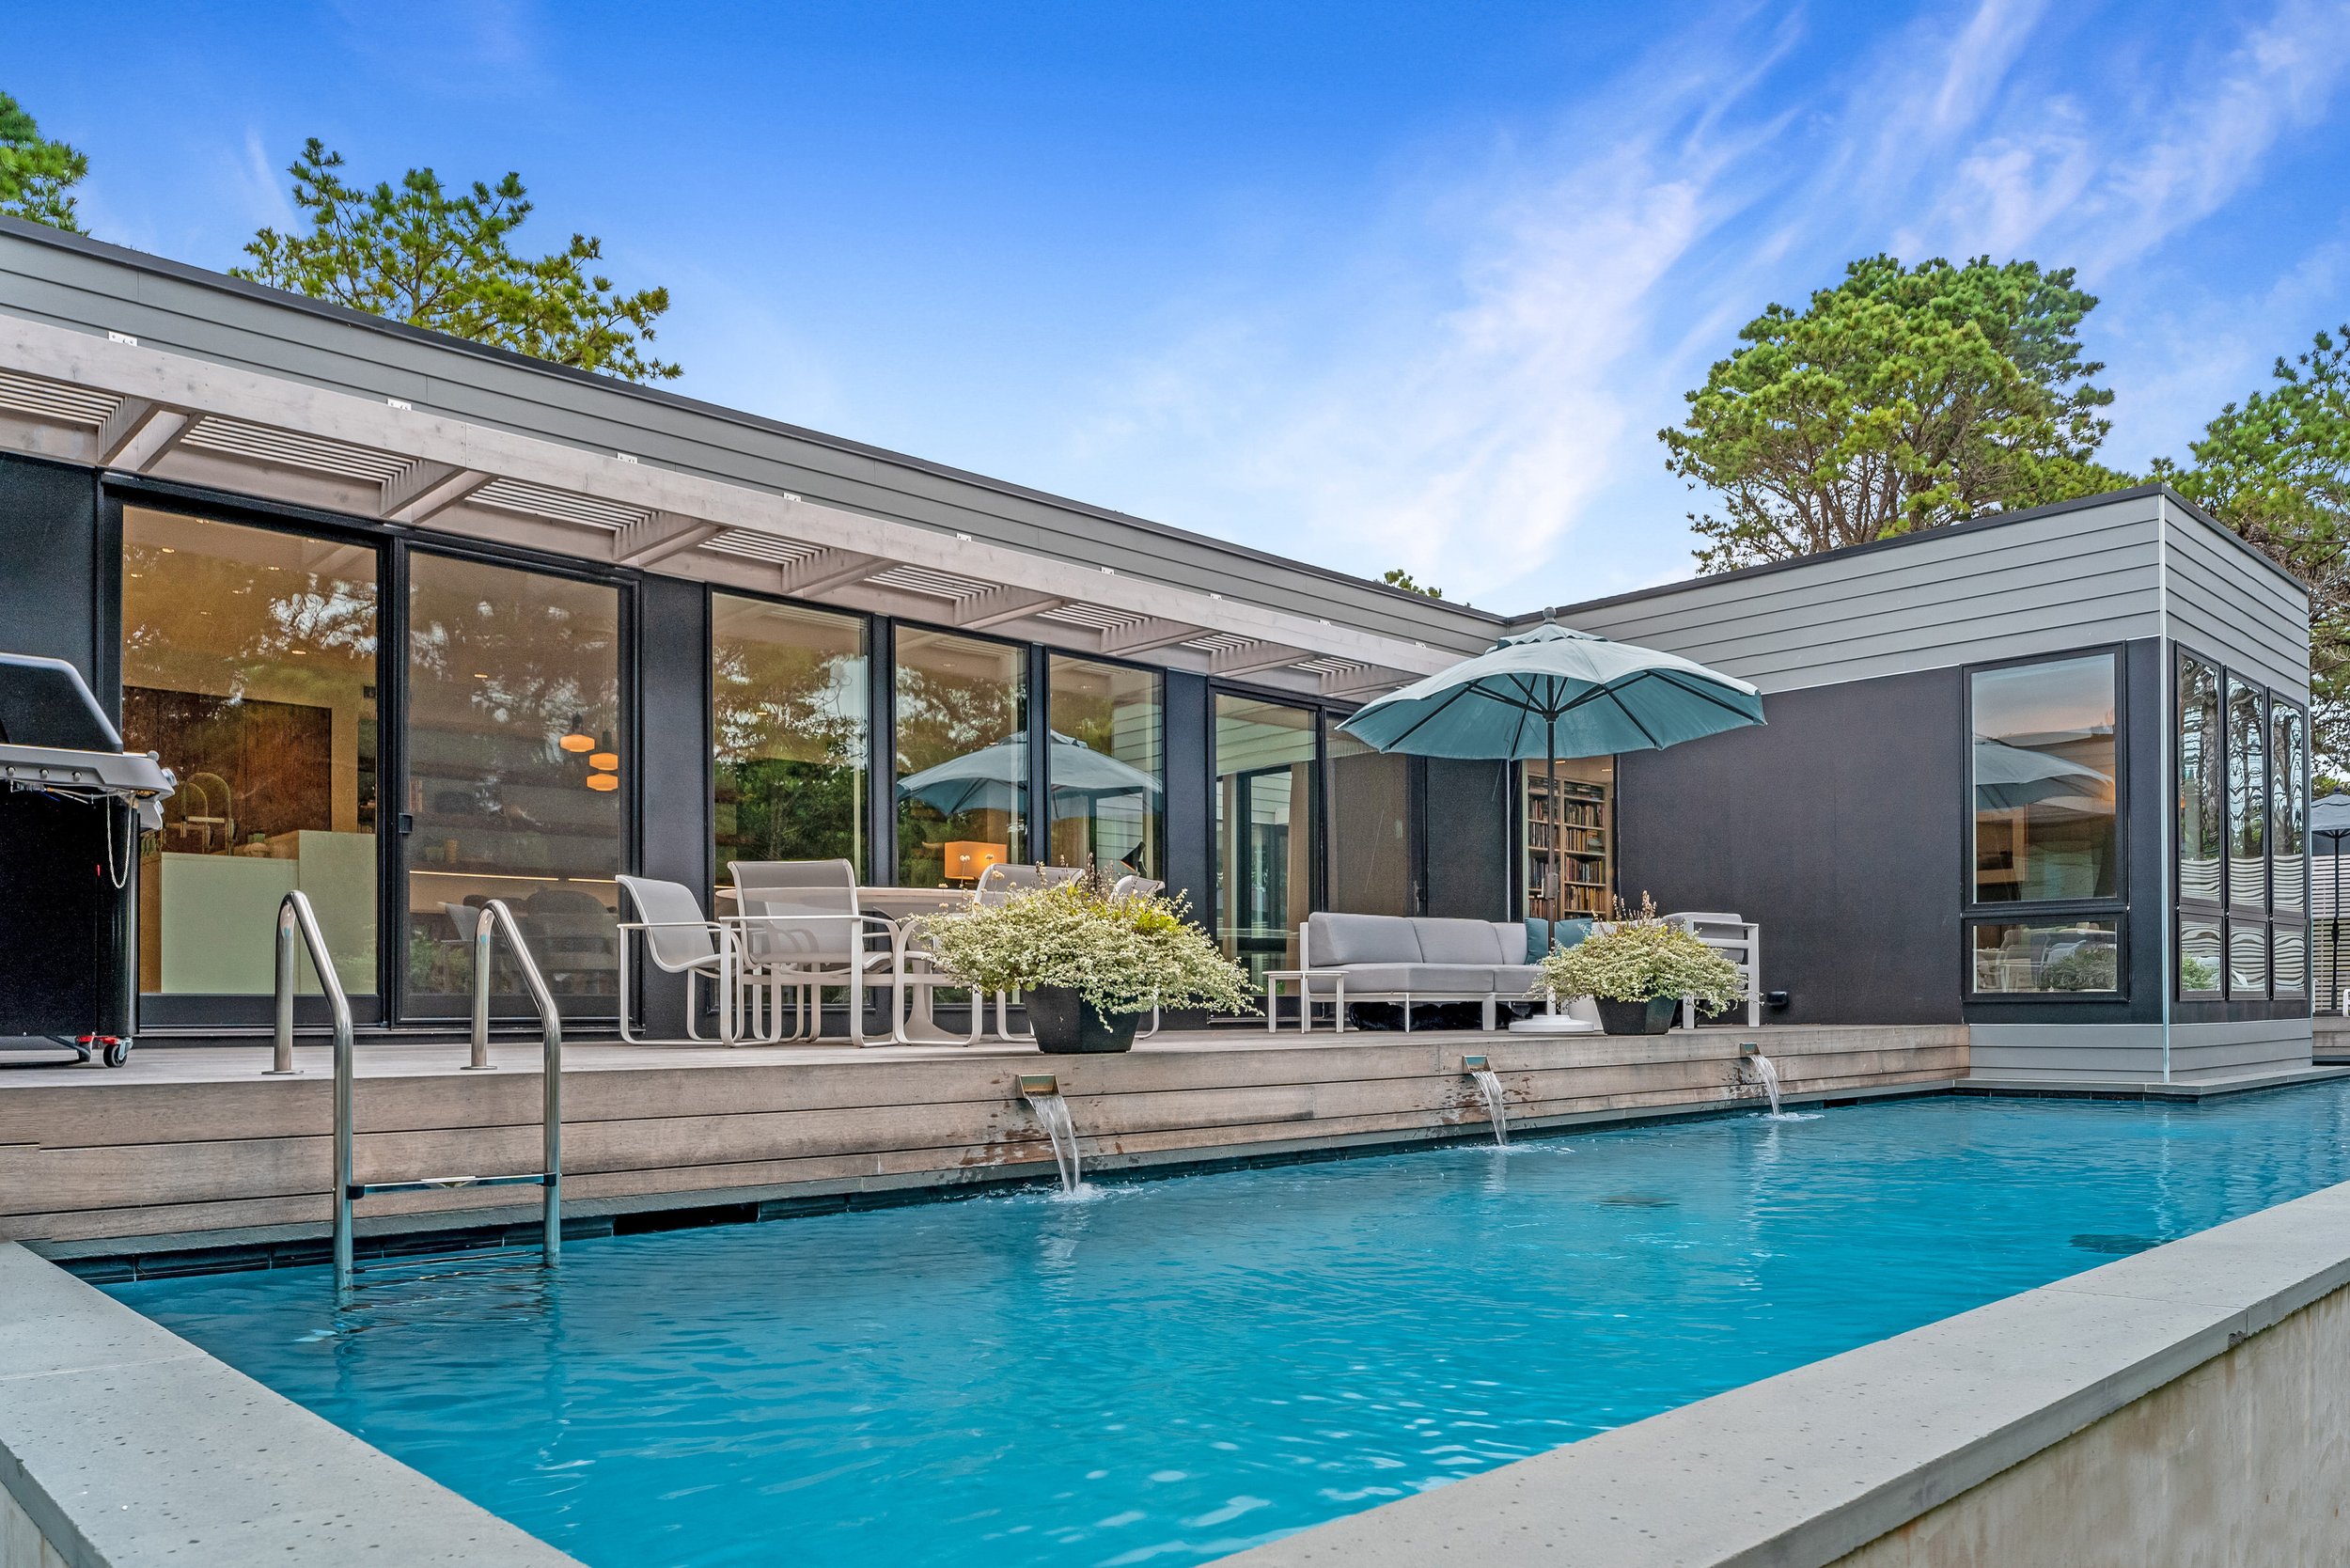 res4-resolution-4-architecture-modern-modular-prefab-amagansett-hamptons-whalers-residence-28-pool-deck-scuppers.jpg